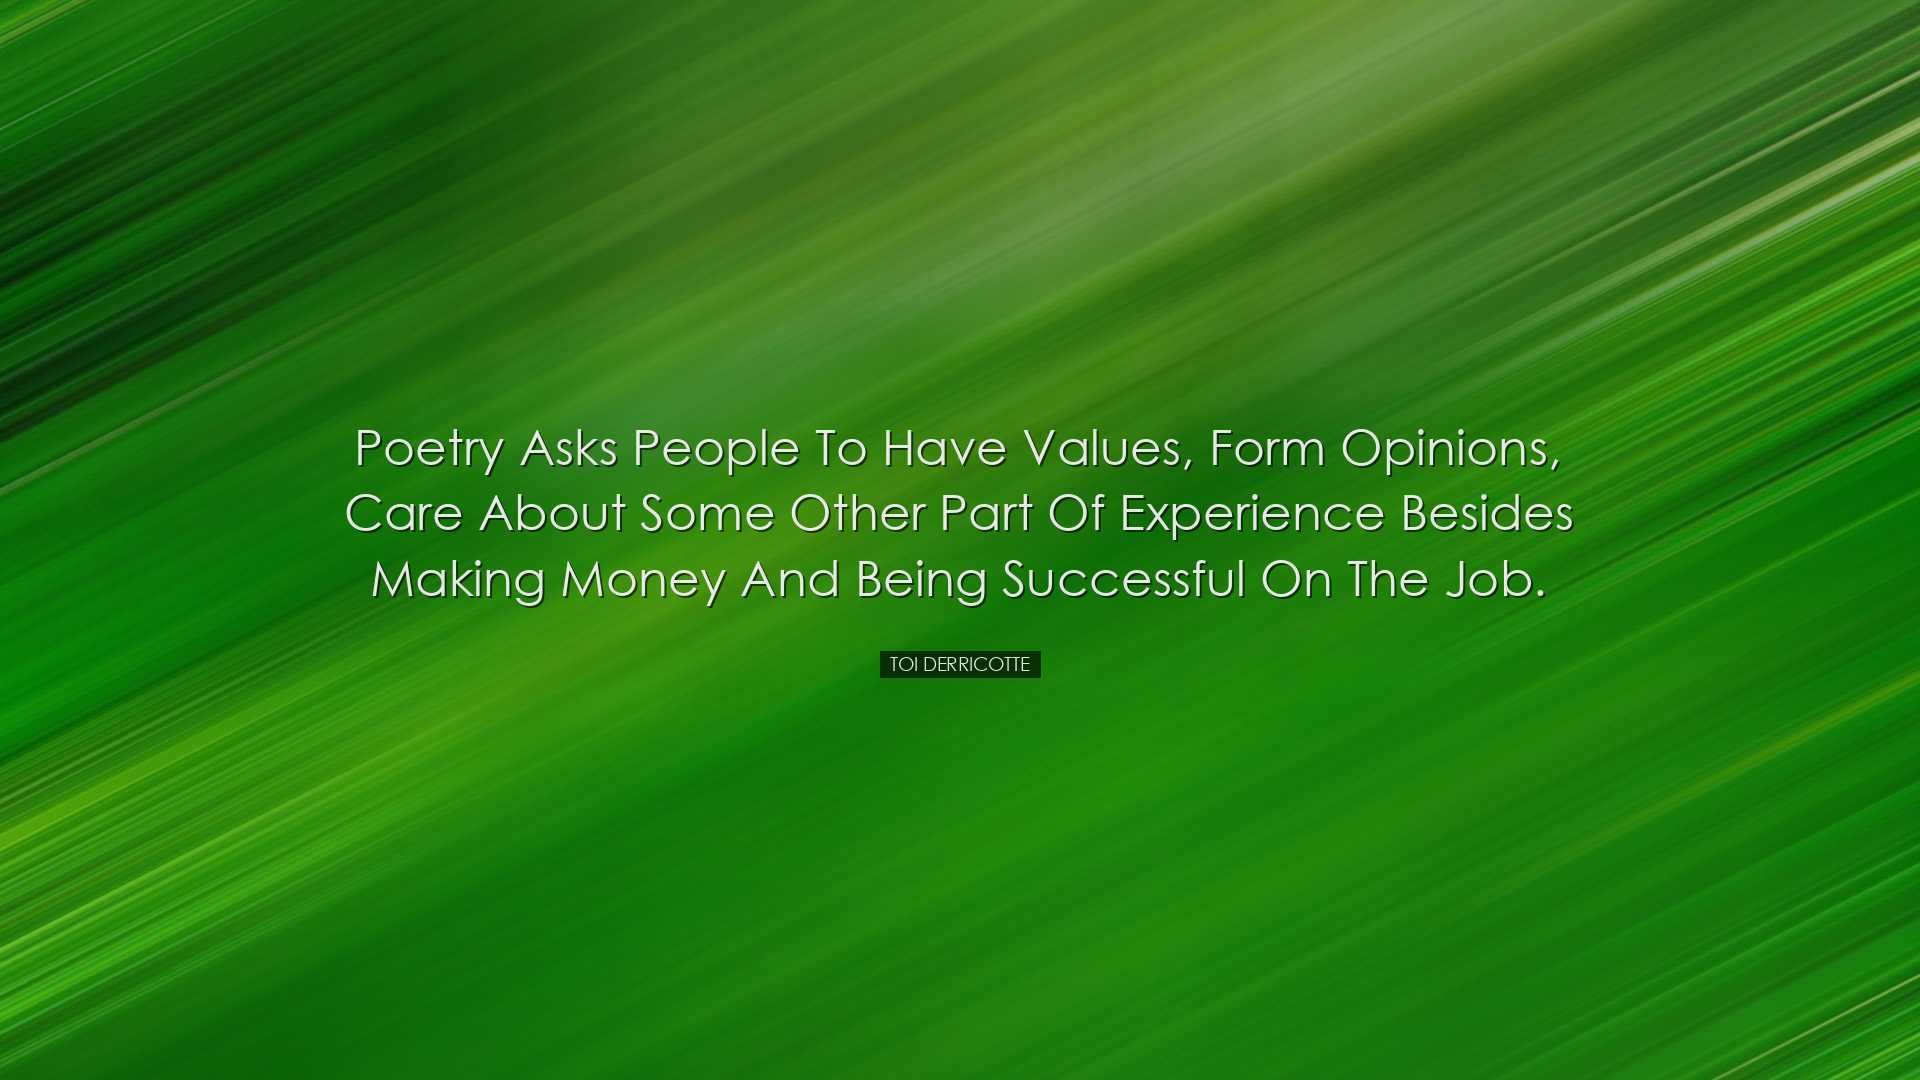 Poetry asks people to have values, form opinions, care about some